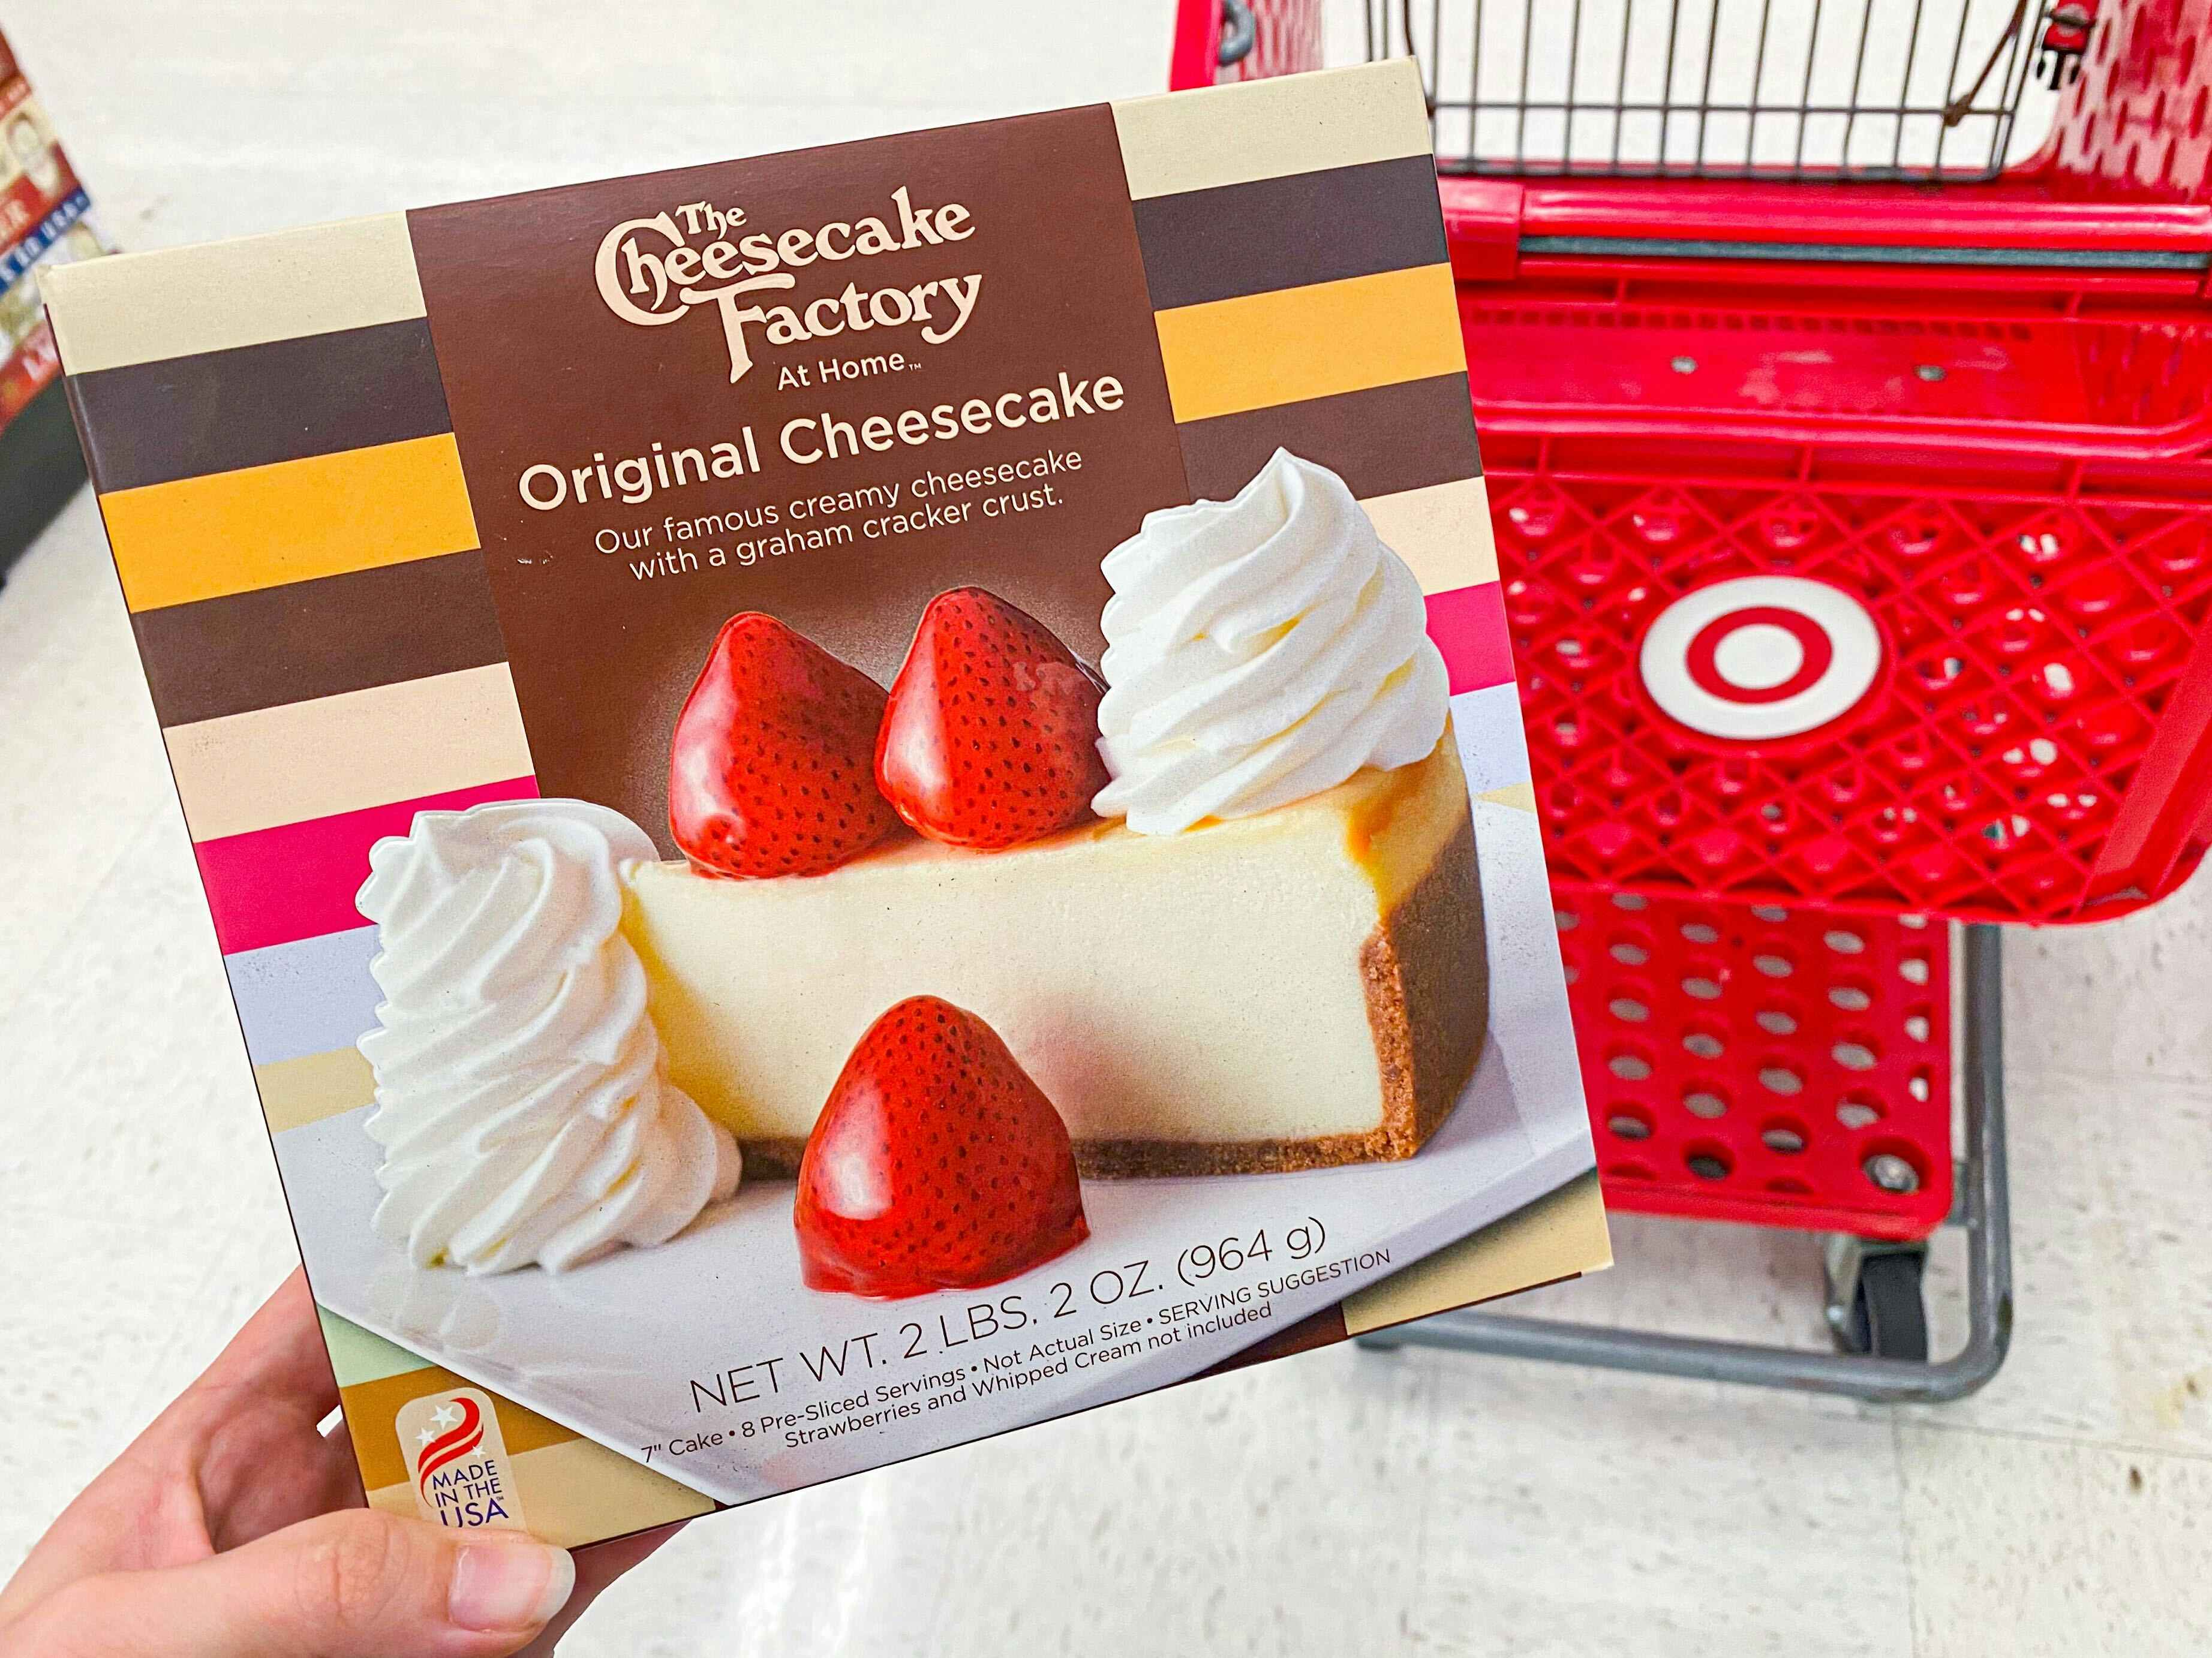 The Cheesecake Factory original cheesecake held next to a Target shopping cart